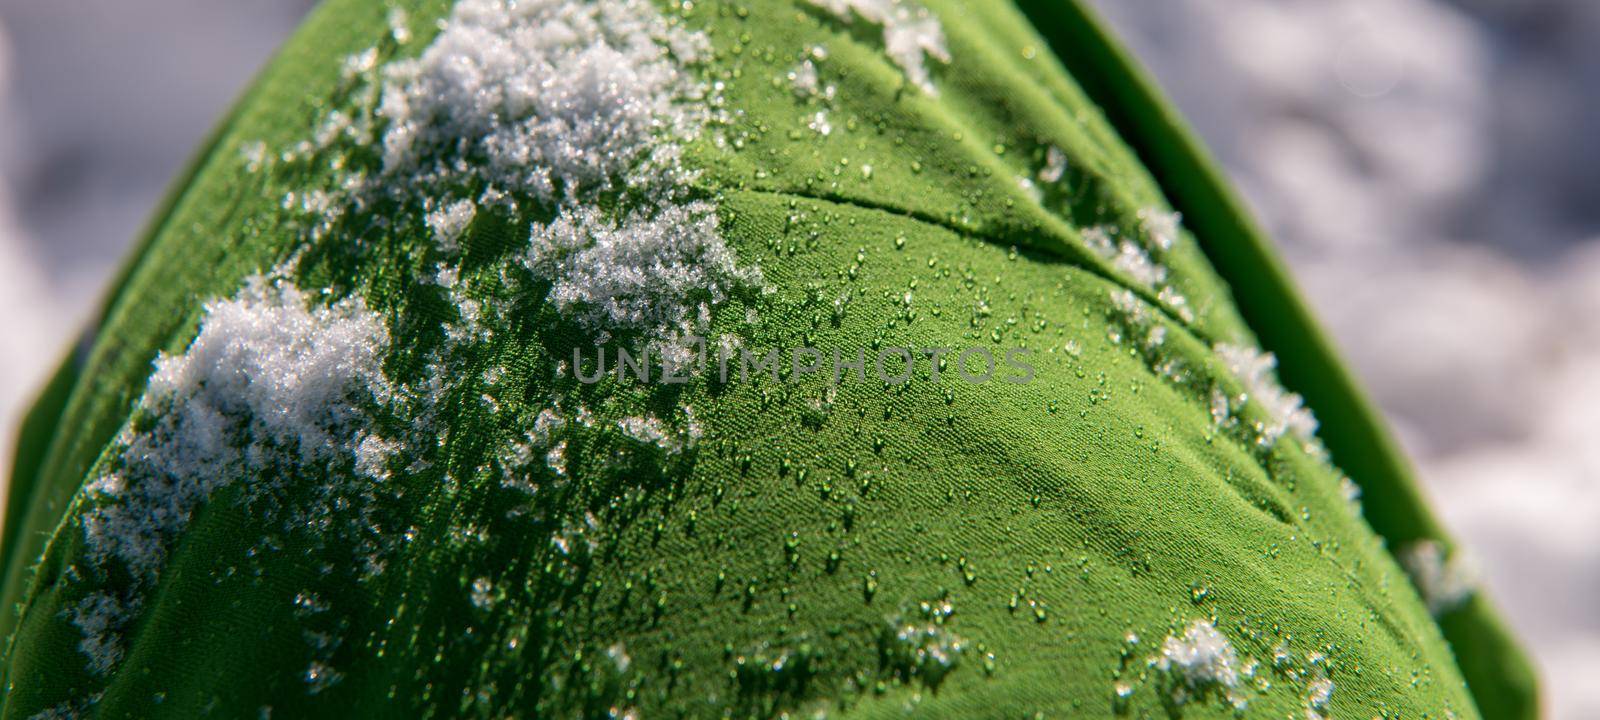 Snow and  water droplets on green waterproof fabric from skiing clothes in winter